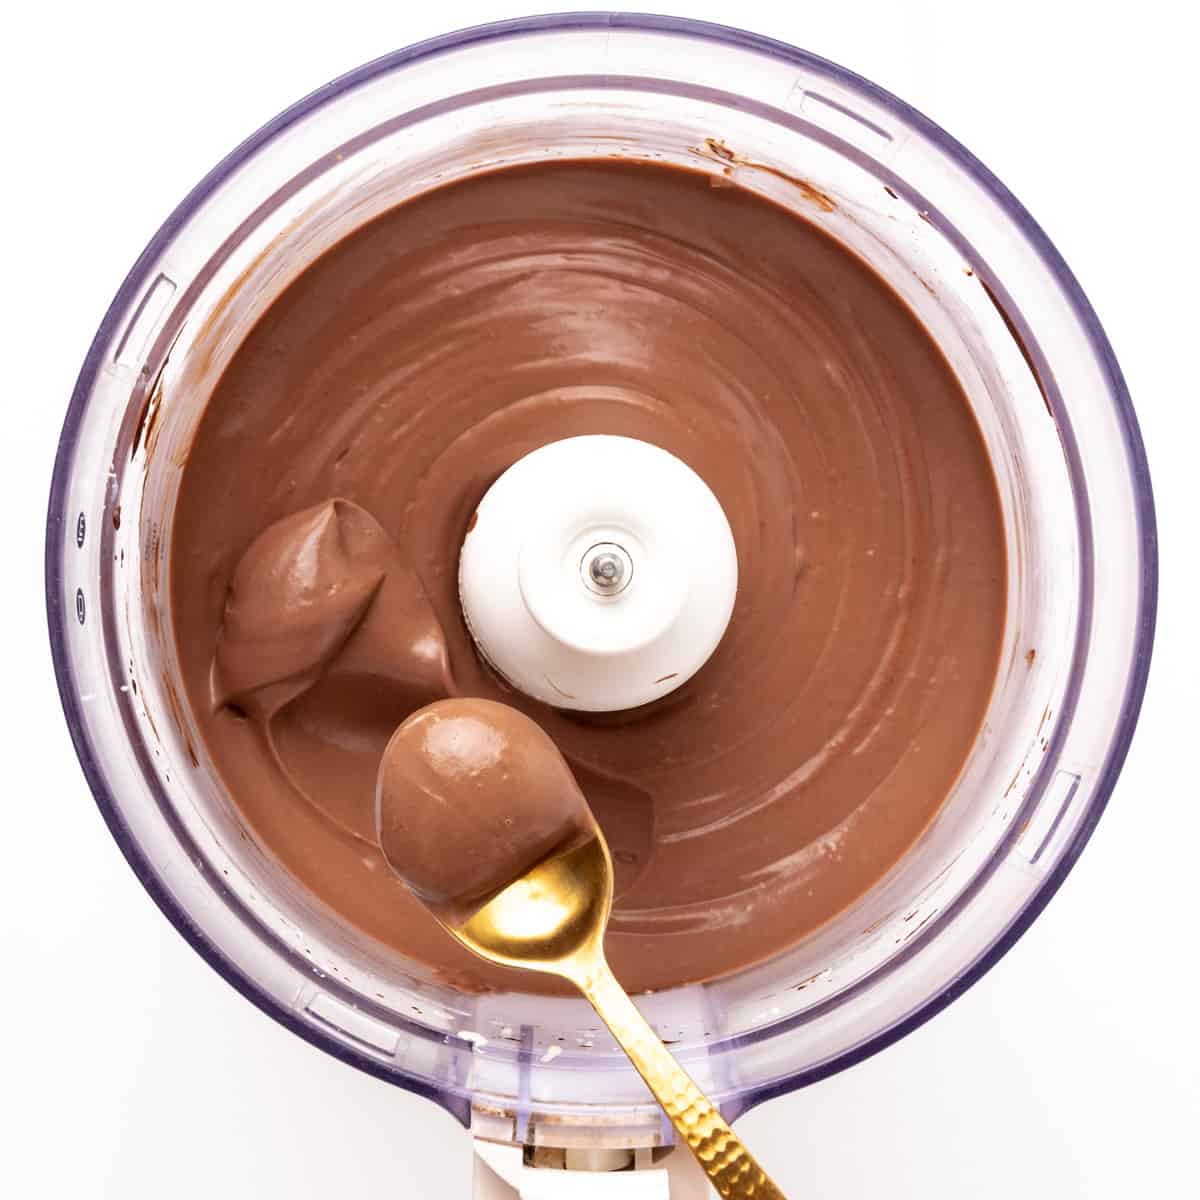 A spoons scoops up mousse from a food processor.